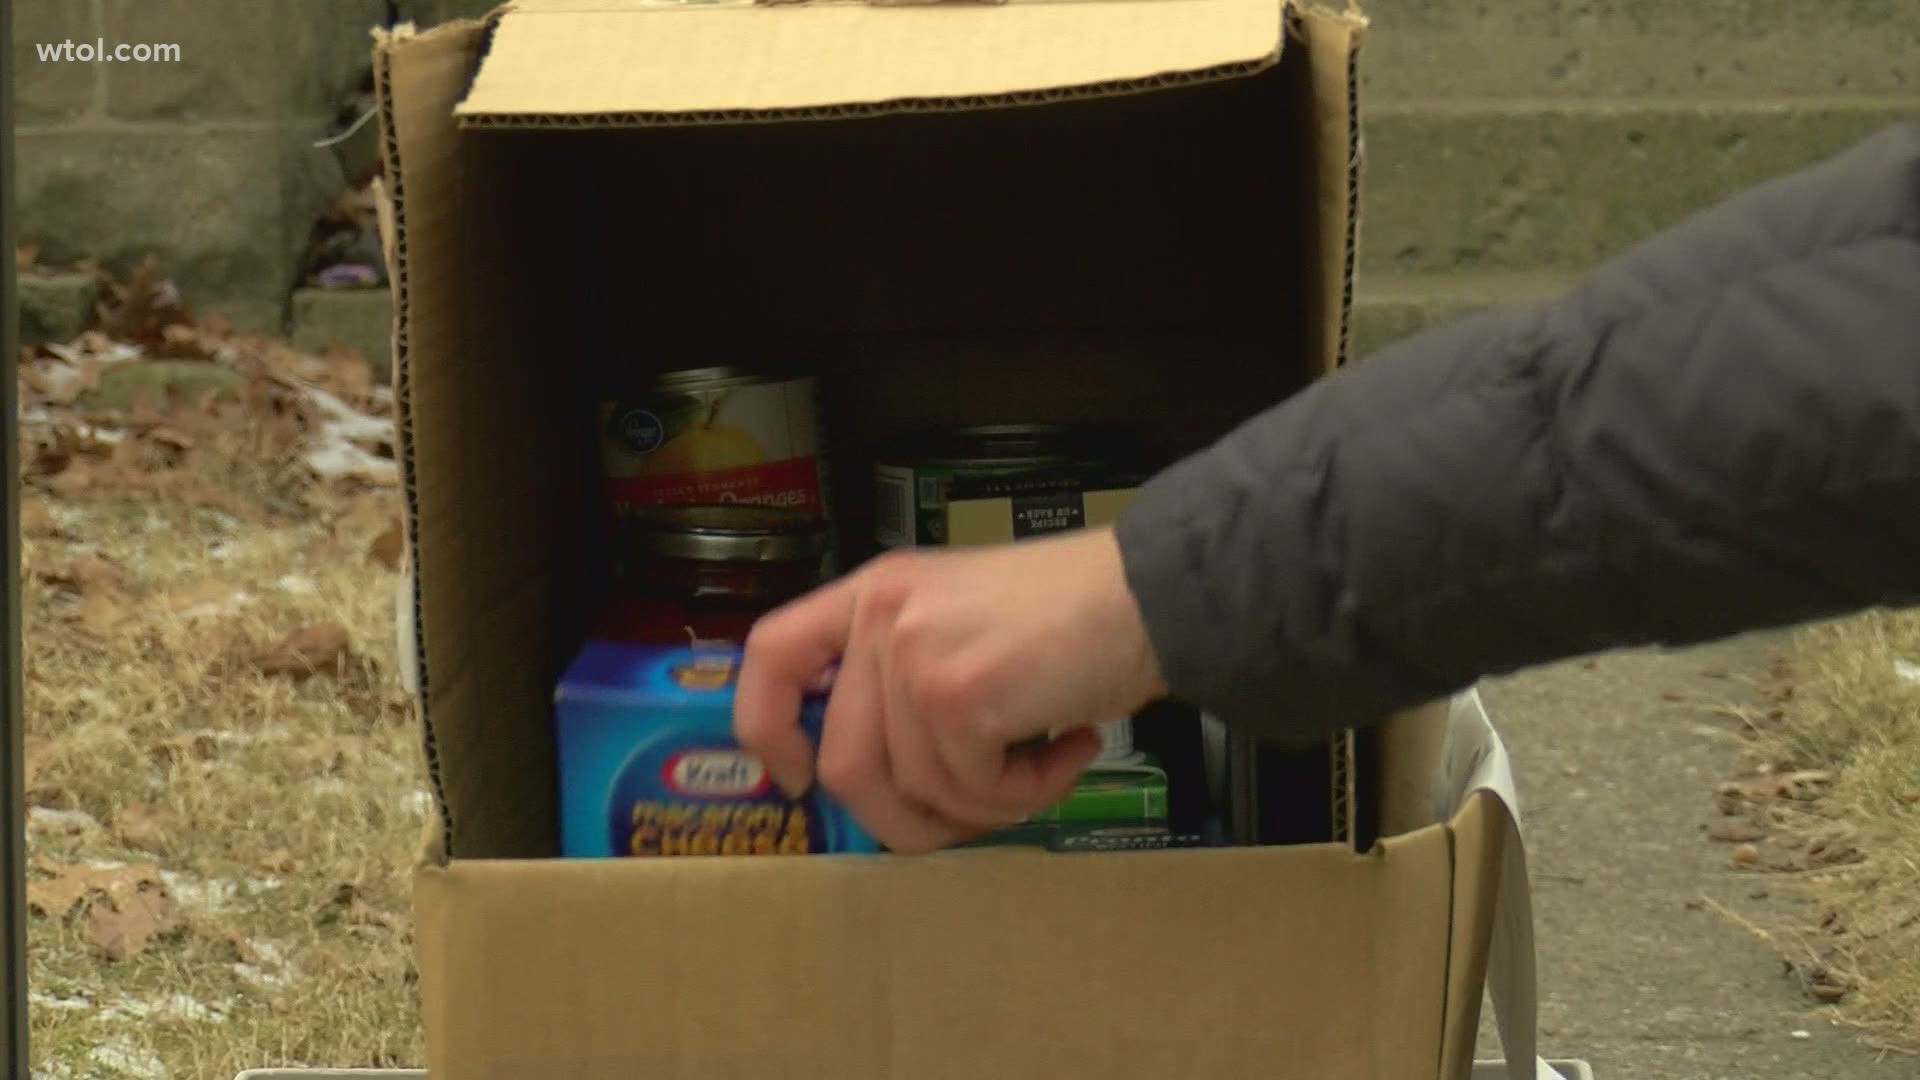 Borrowing from the concept of a Little Free Library, a Little Free Pantry offers free food for those in need. The hope is that the idea catches on across Toledo.